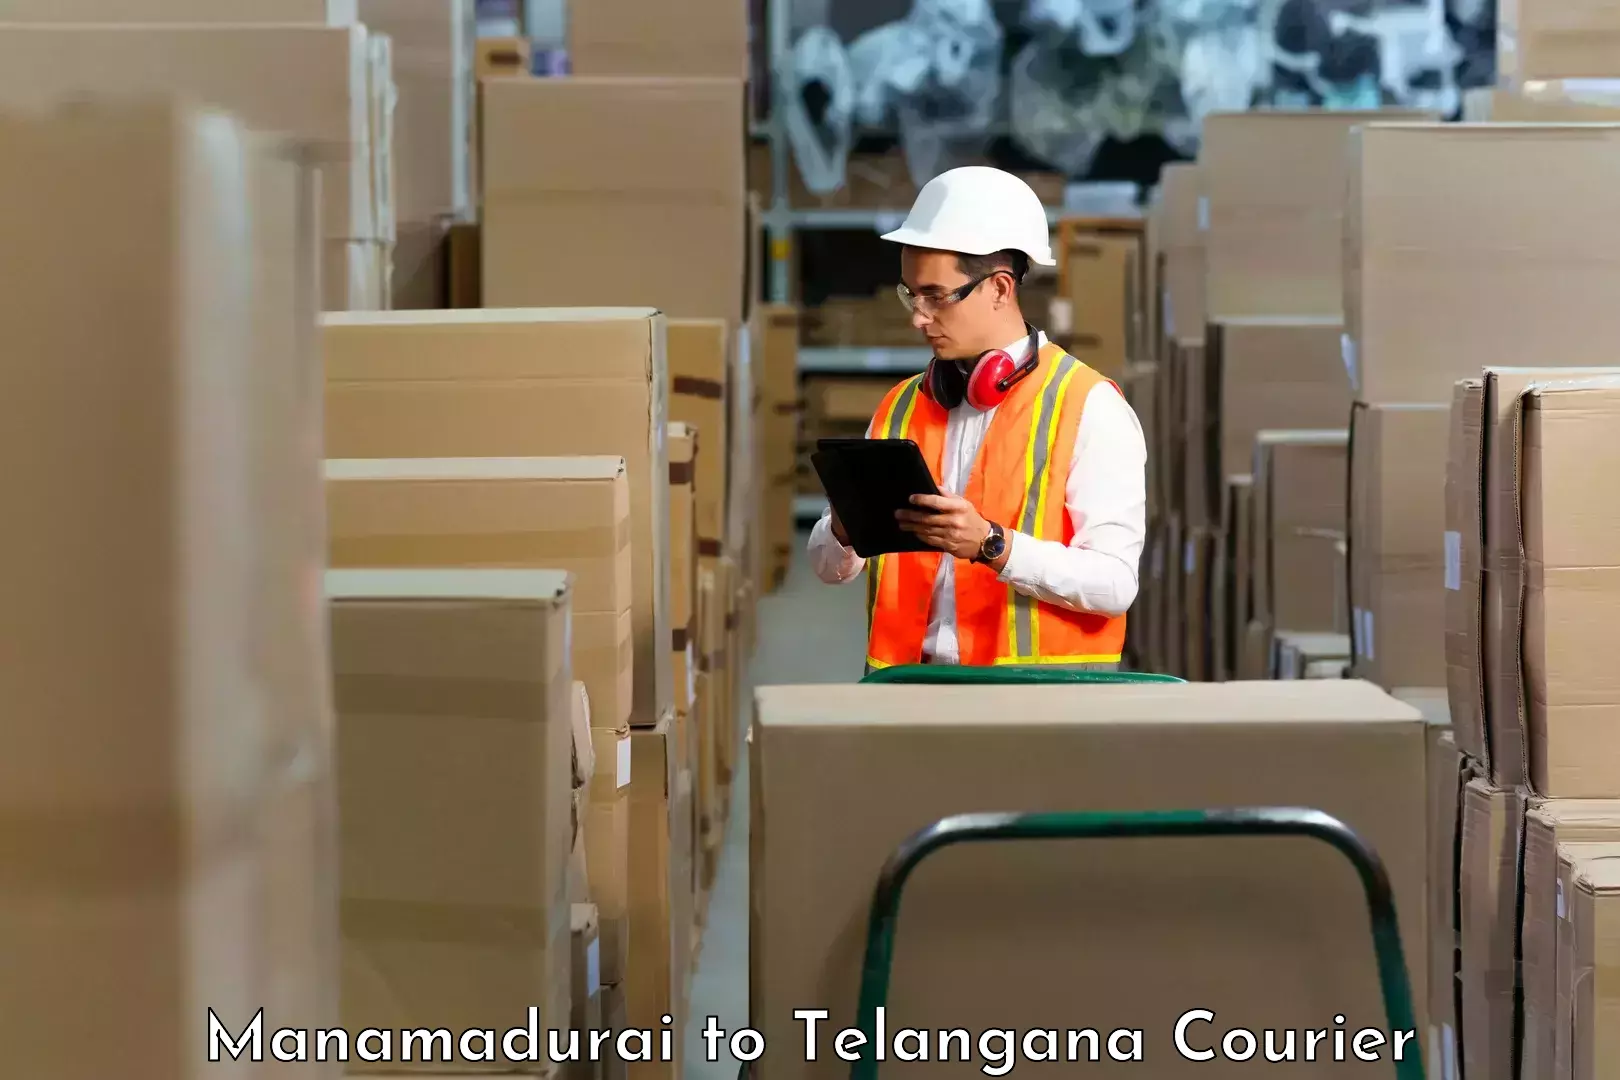 State-of-the-art courier technology Manamadurai to Manneguda